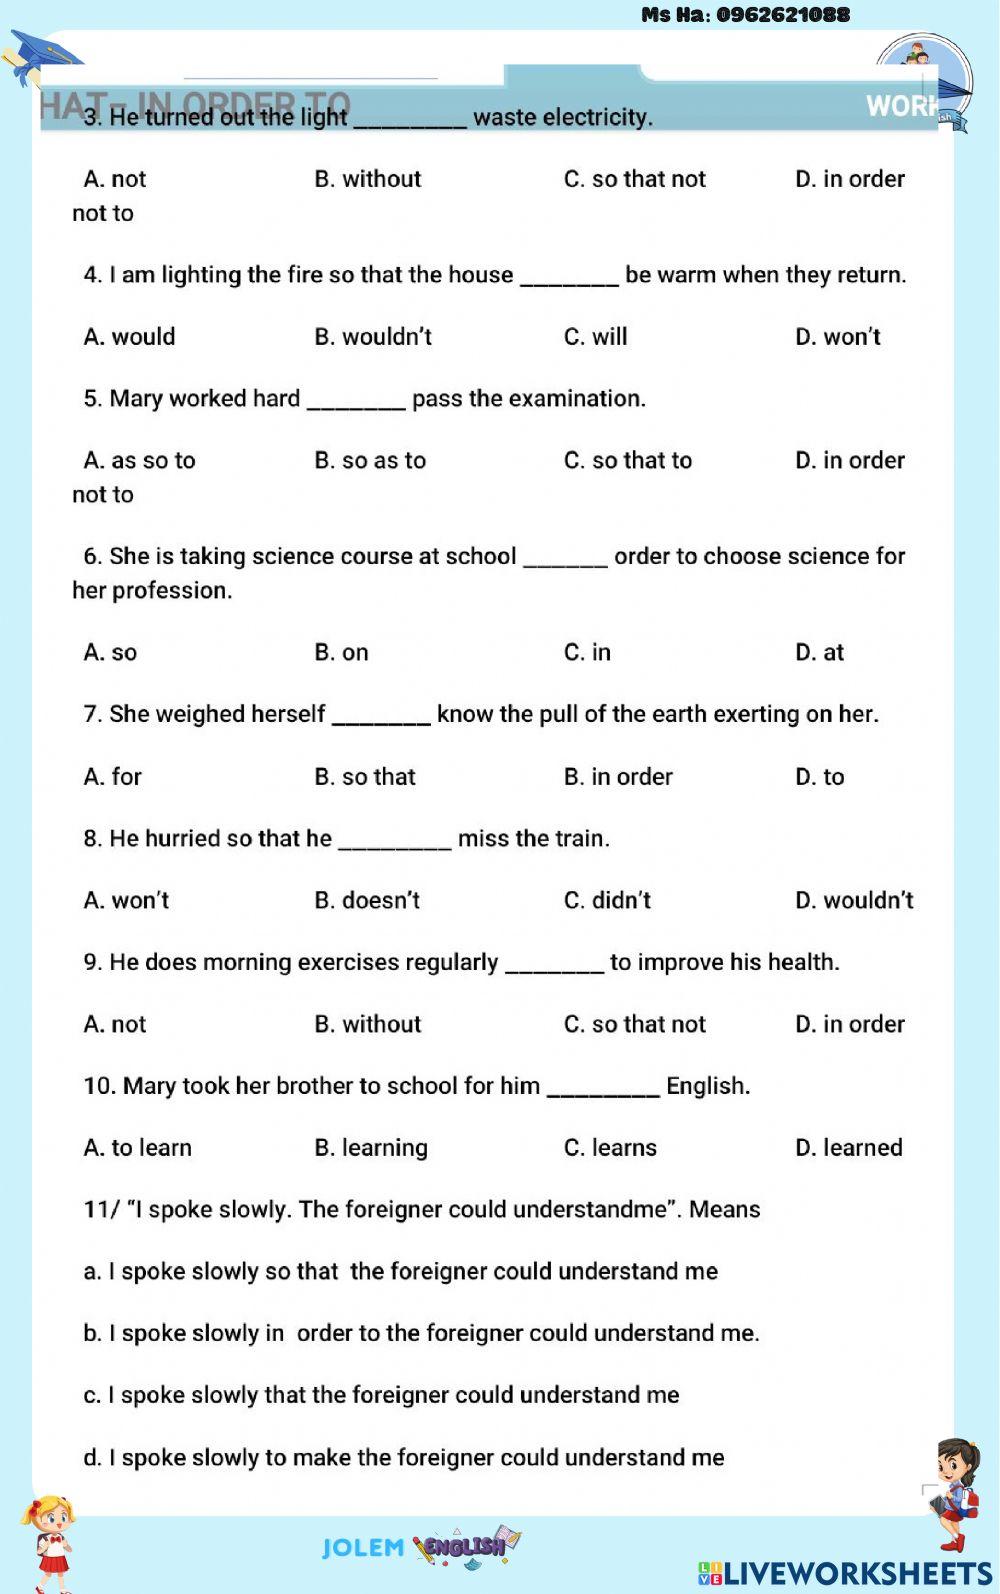 So that, In order to - Exercise 1 - Worksheet